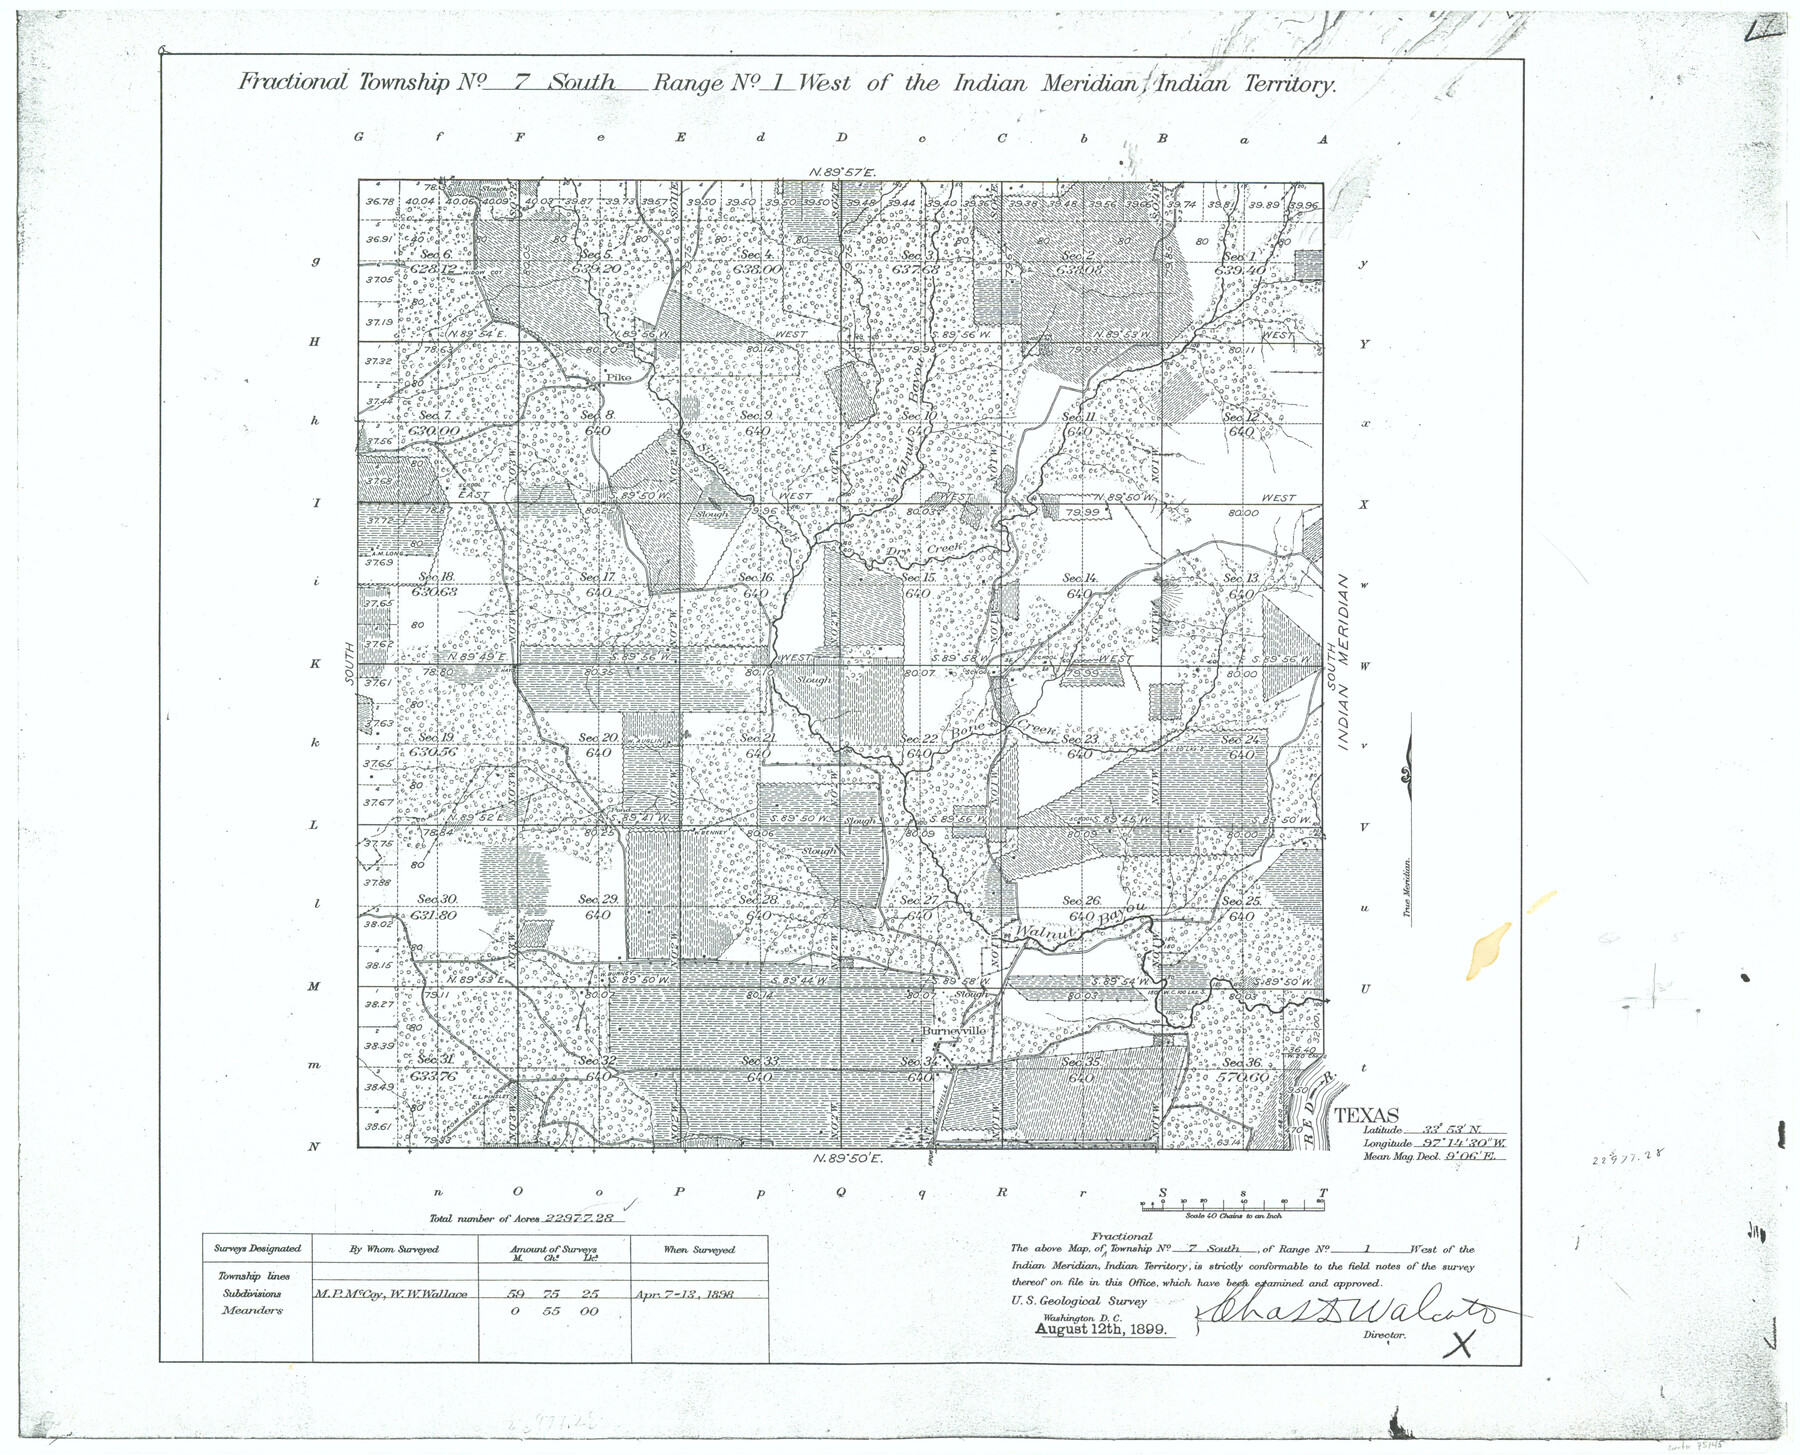 75145, Fractional Township No. 7 South Range No. 1 West of the Indian Meridian, Indian Territory, General Map Collection